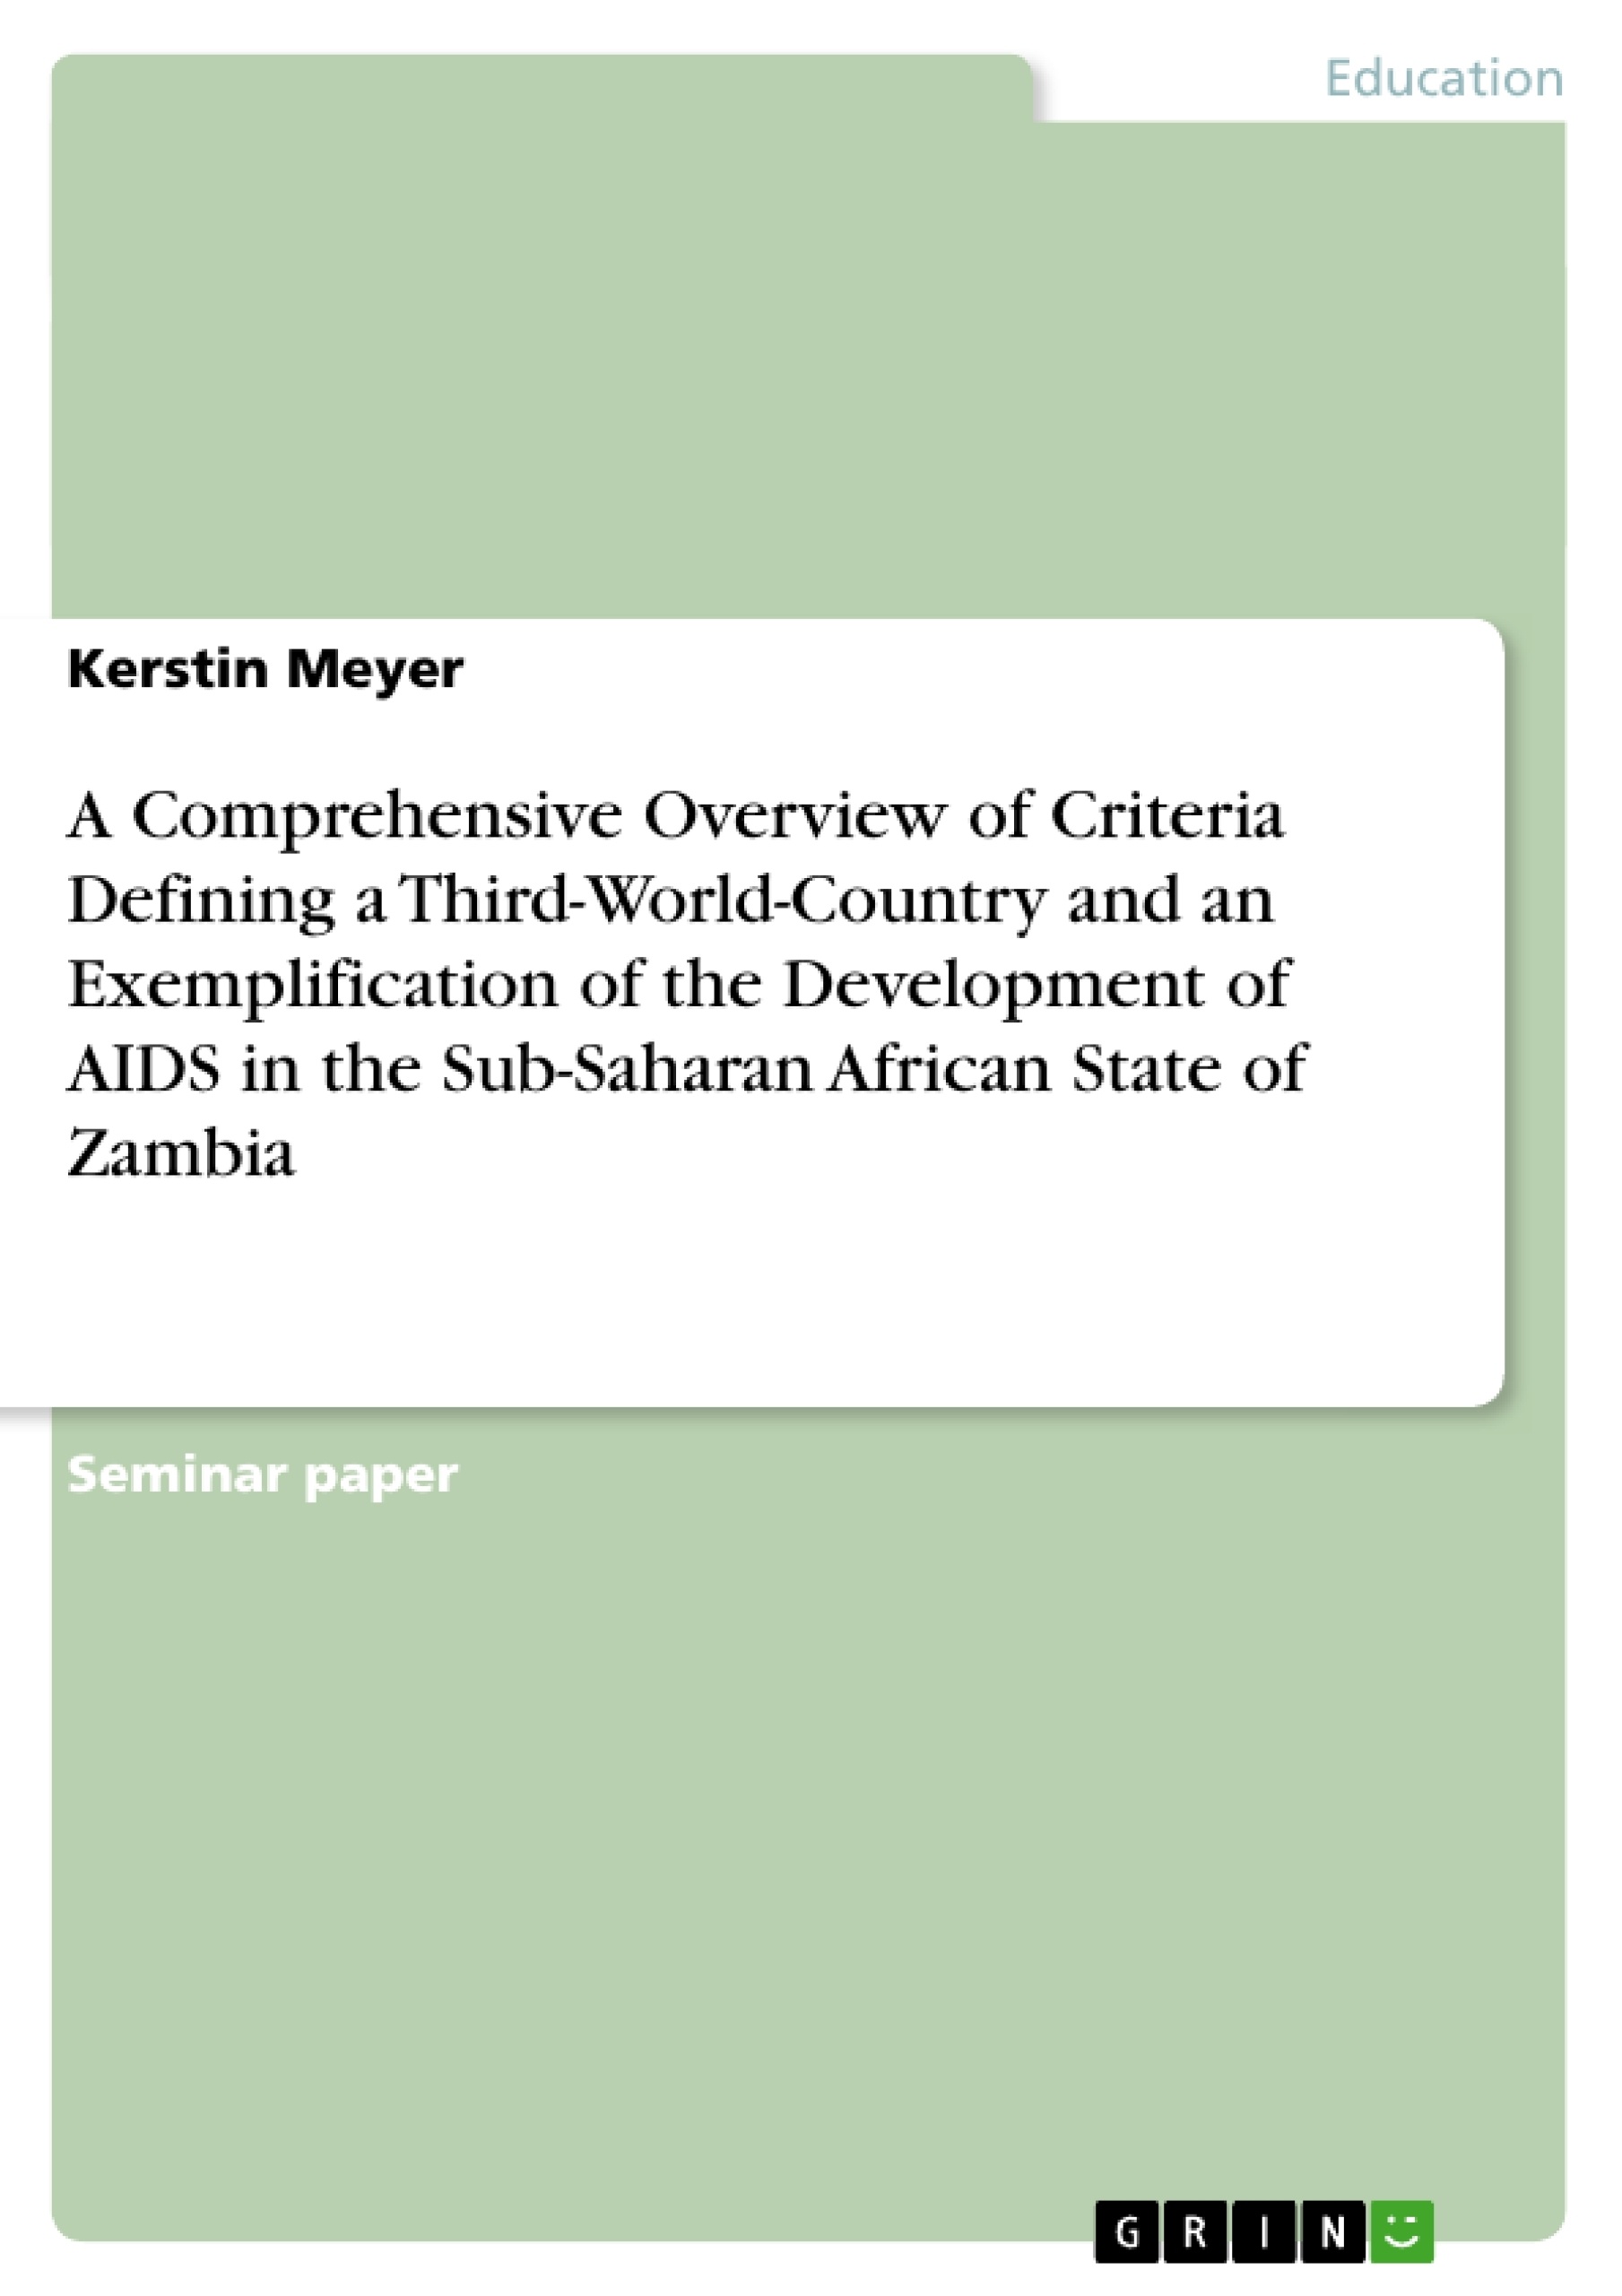 Titel: A Comprehensive Overview of Criteria Defining a Third-World-Country and an Exemplification of the Development of AIDS in the Sub-Saharan African State of Zambia